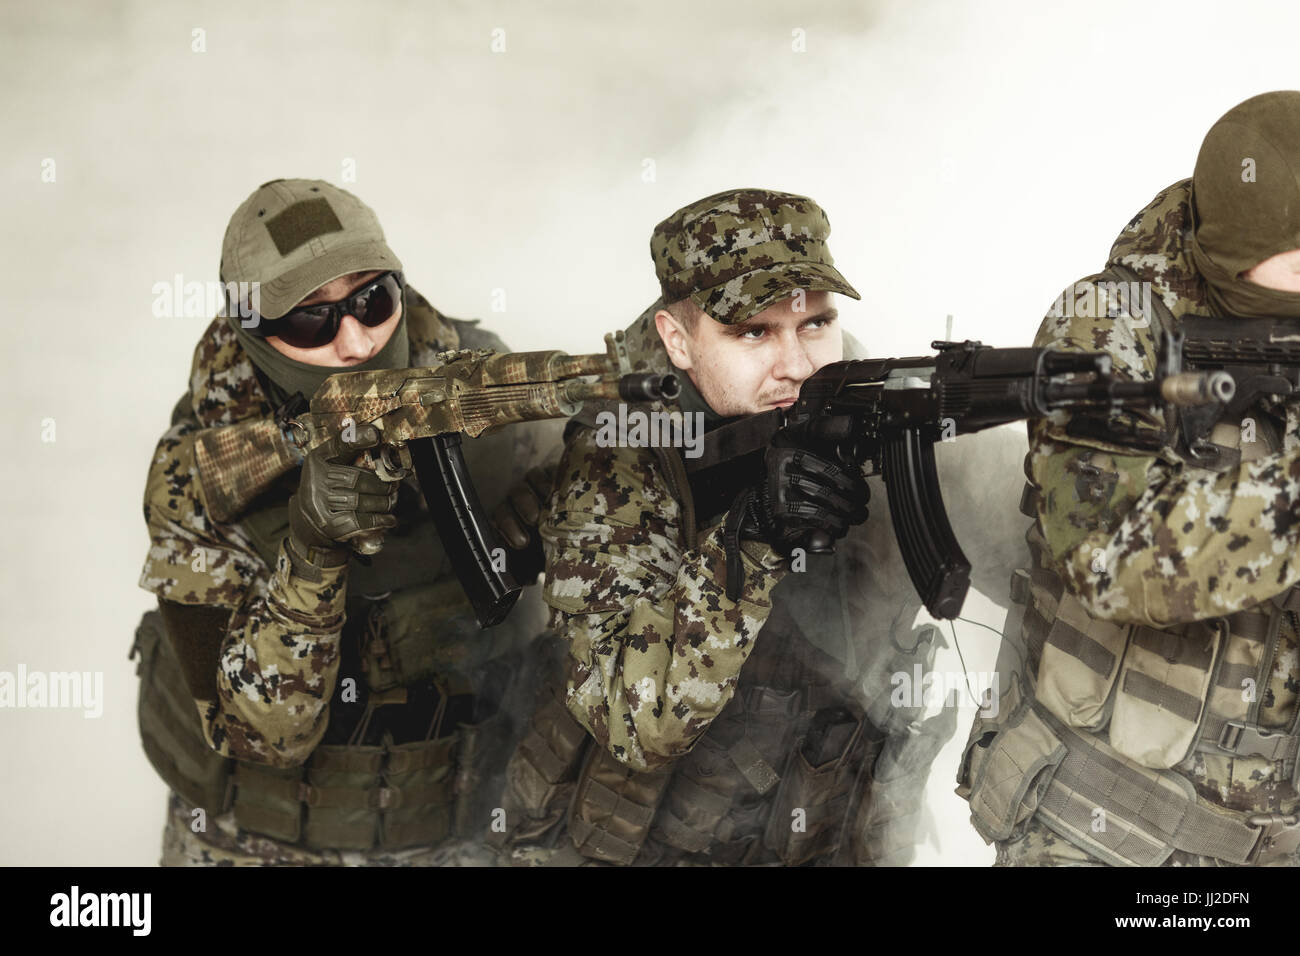 Soldiers in camouflage with weapons Stock Photo